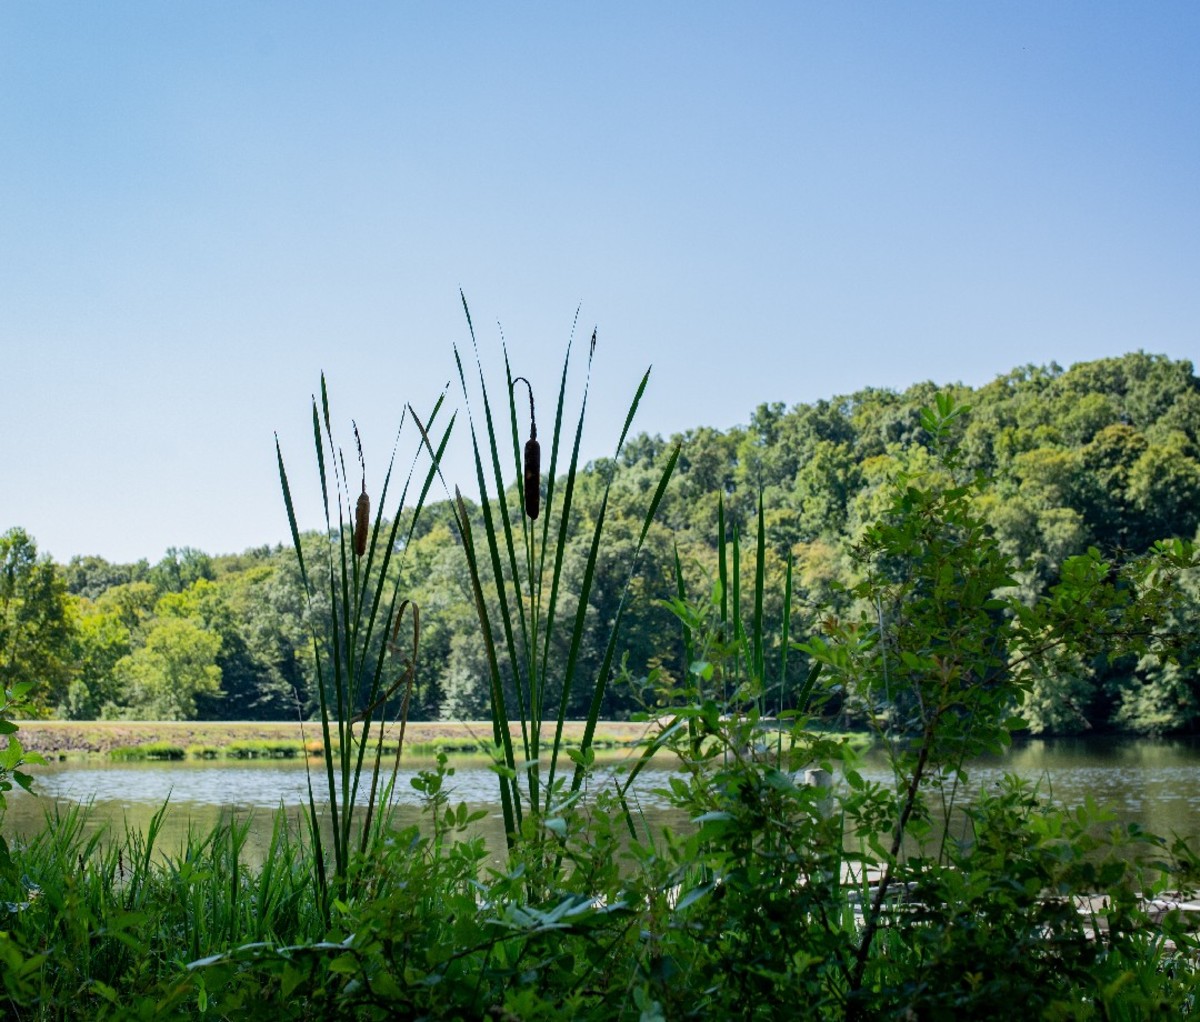 A view of a lake in Southern Indiana with cattails in the foreground and a small forested hill in the background.